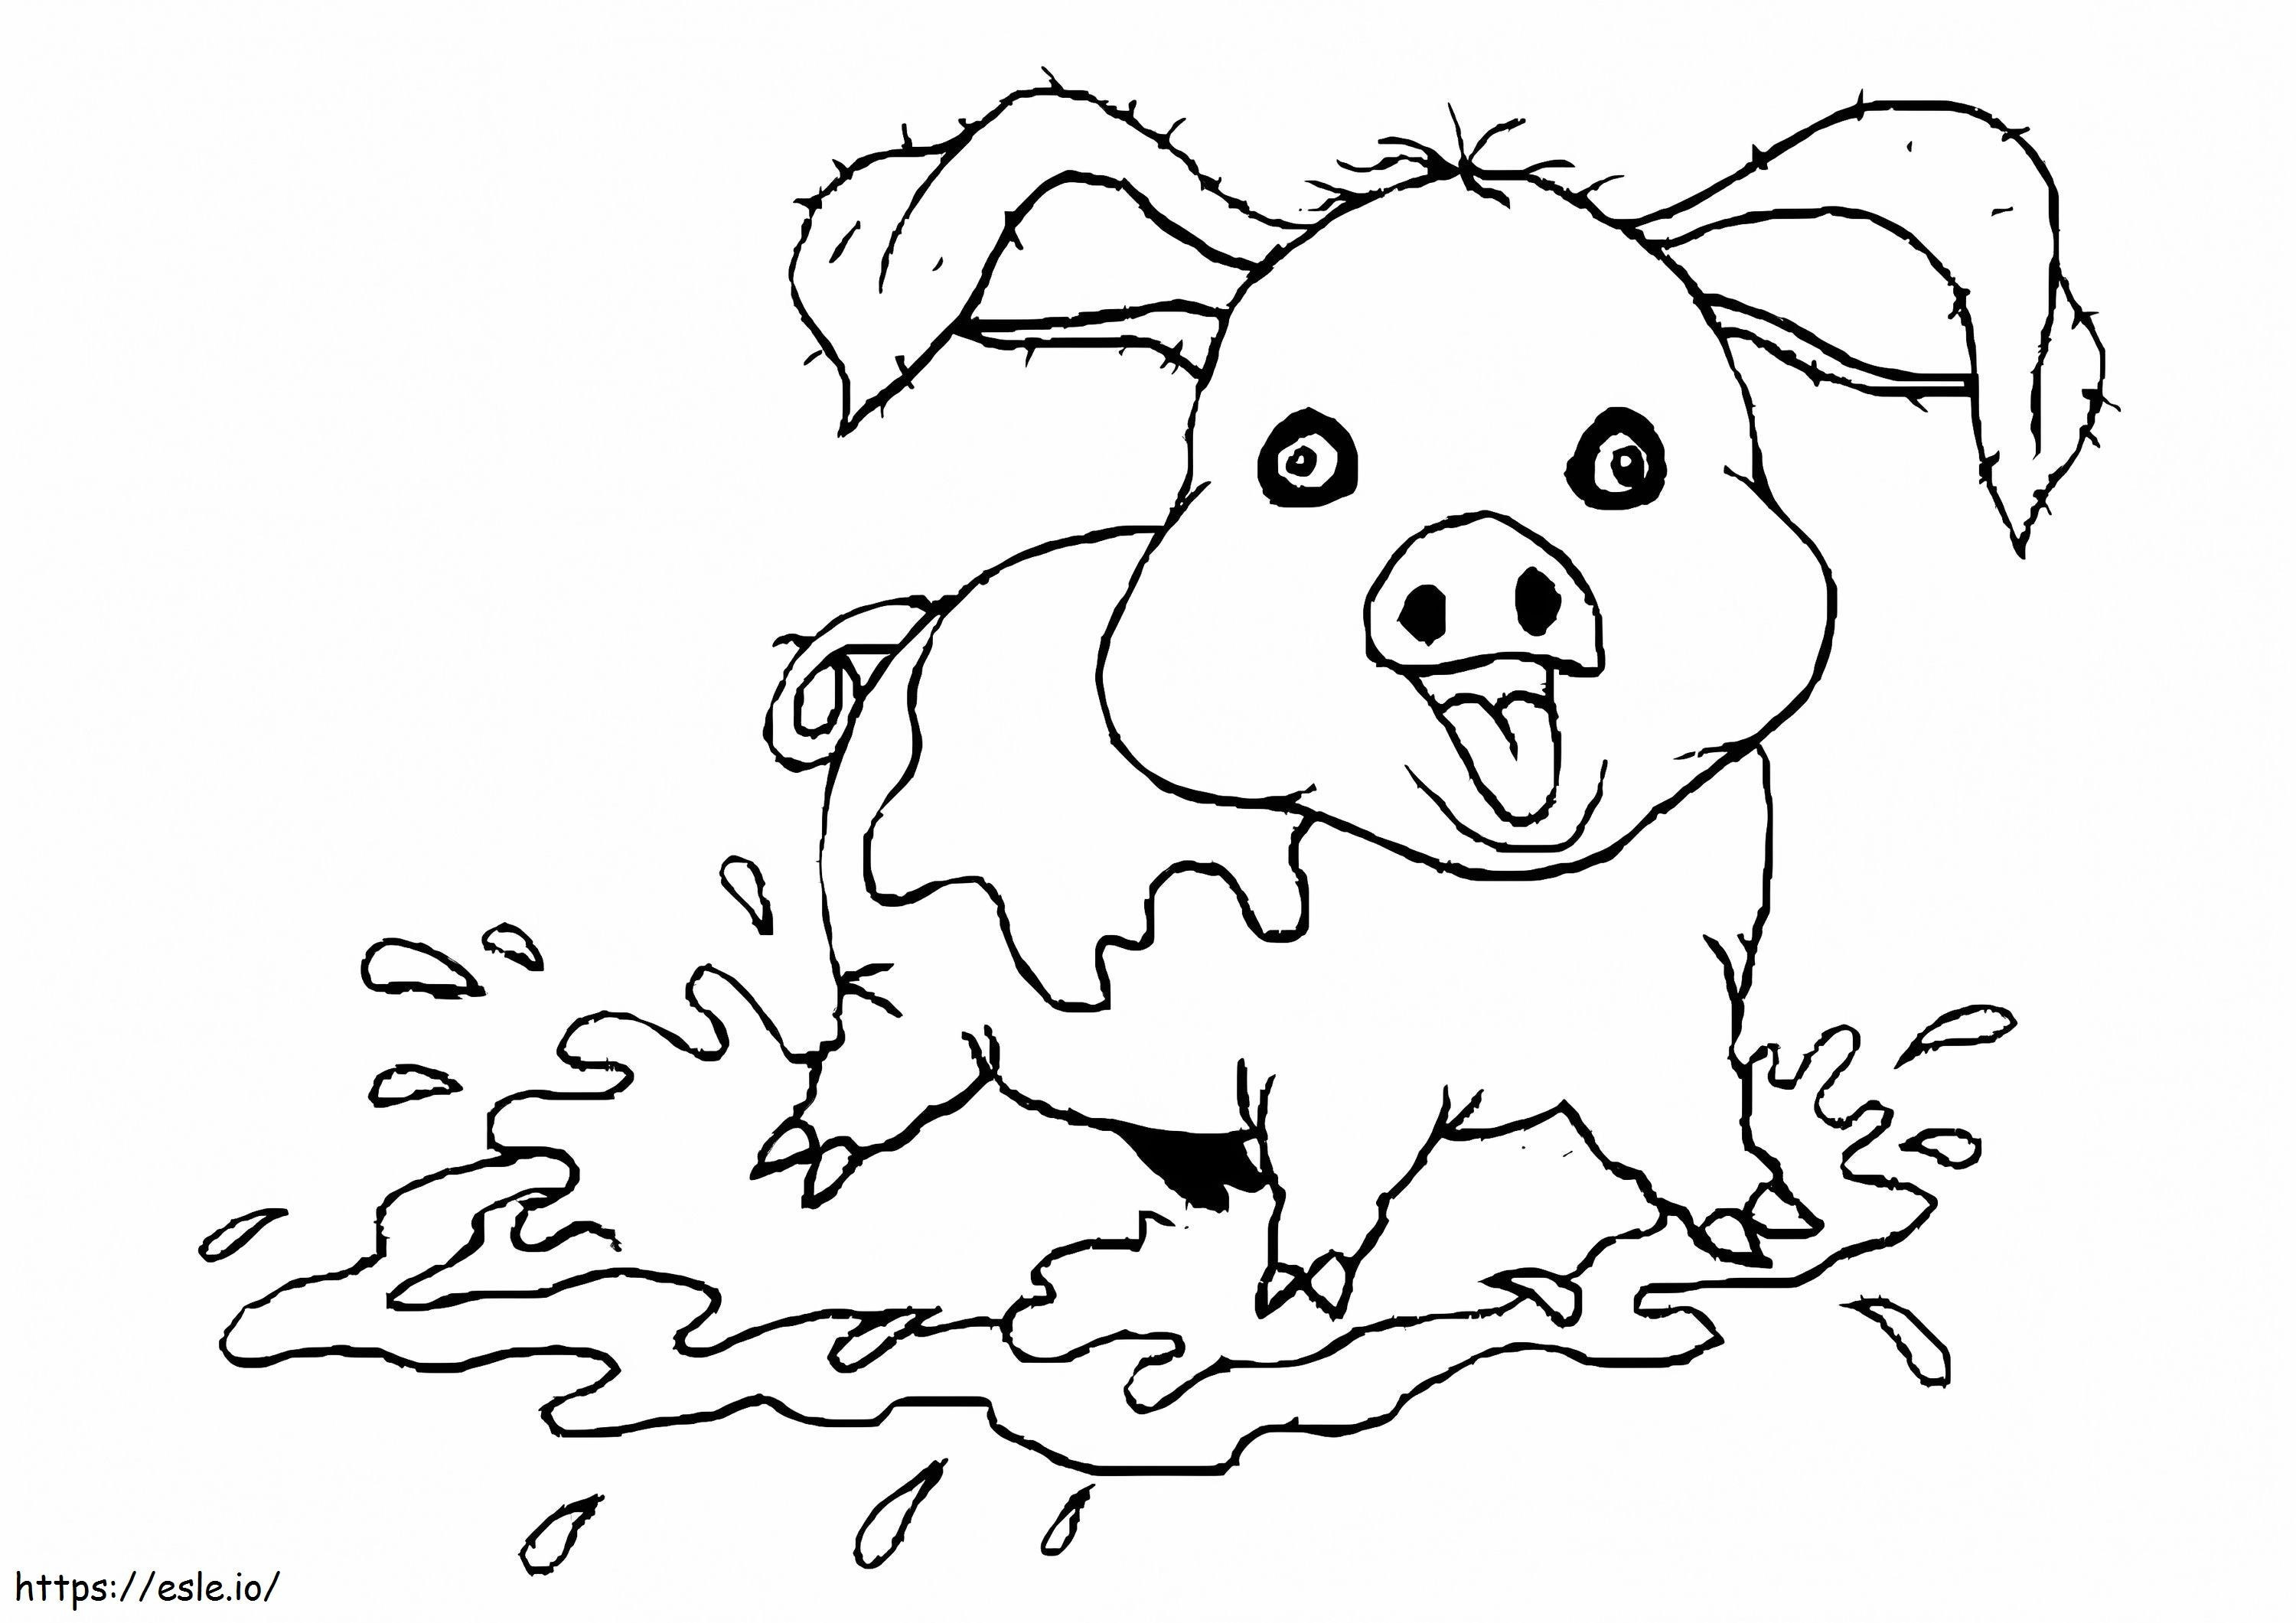 Crazy Pig coloring page